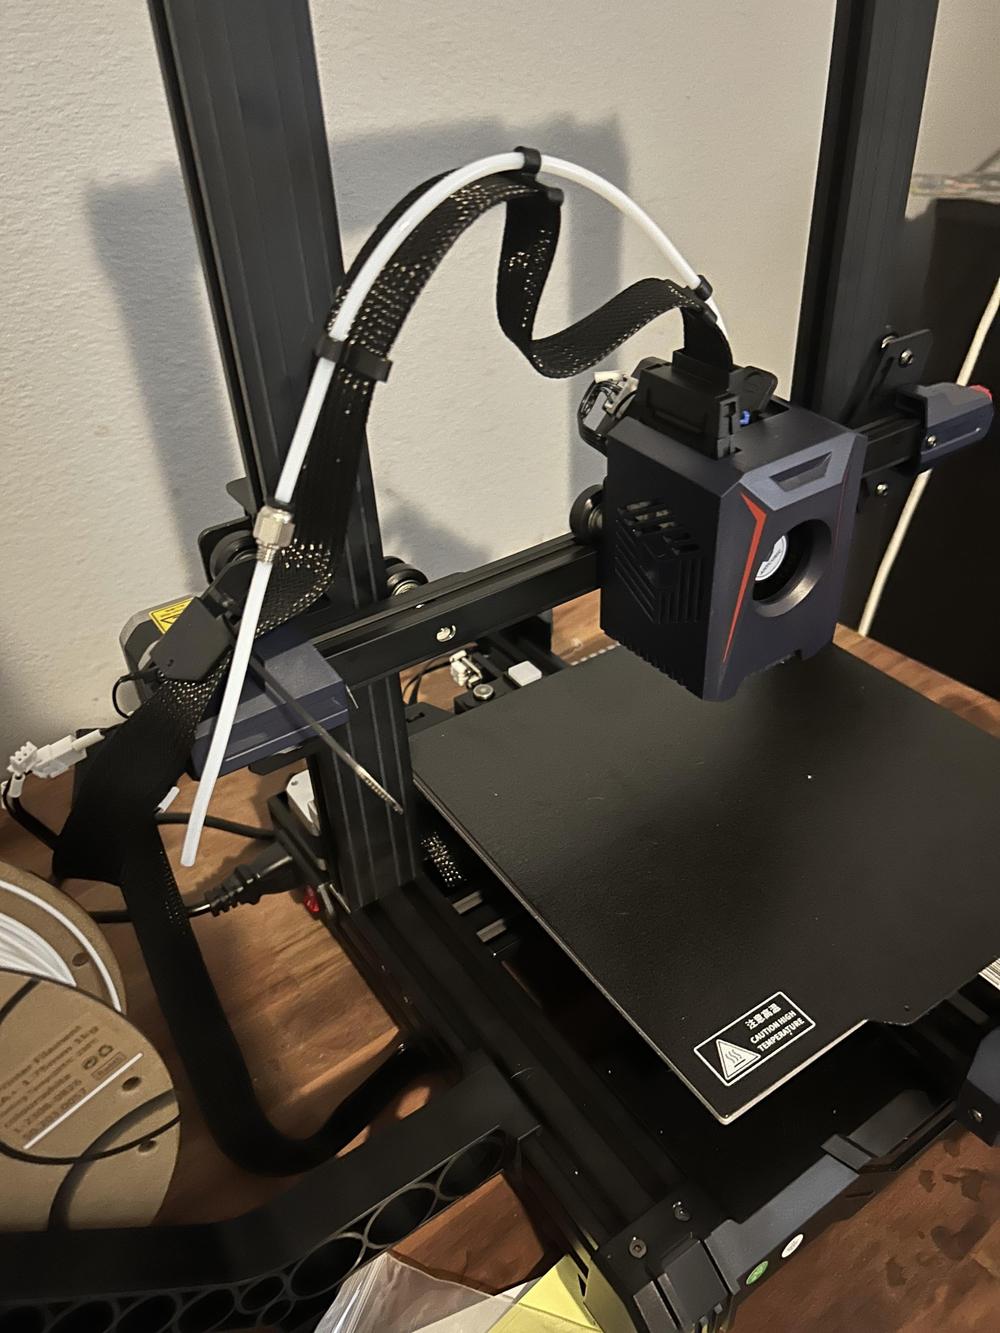 A 3D printer with a black frame and a red nozzle is printing a white object.